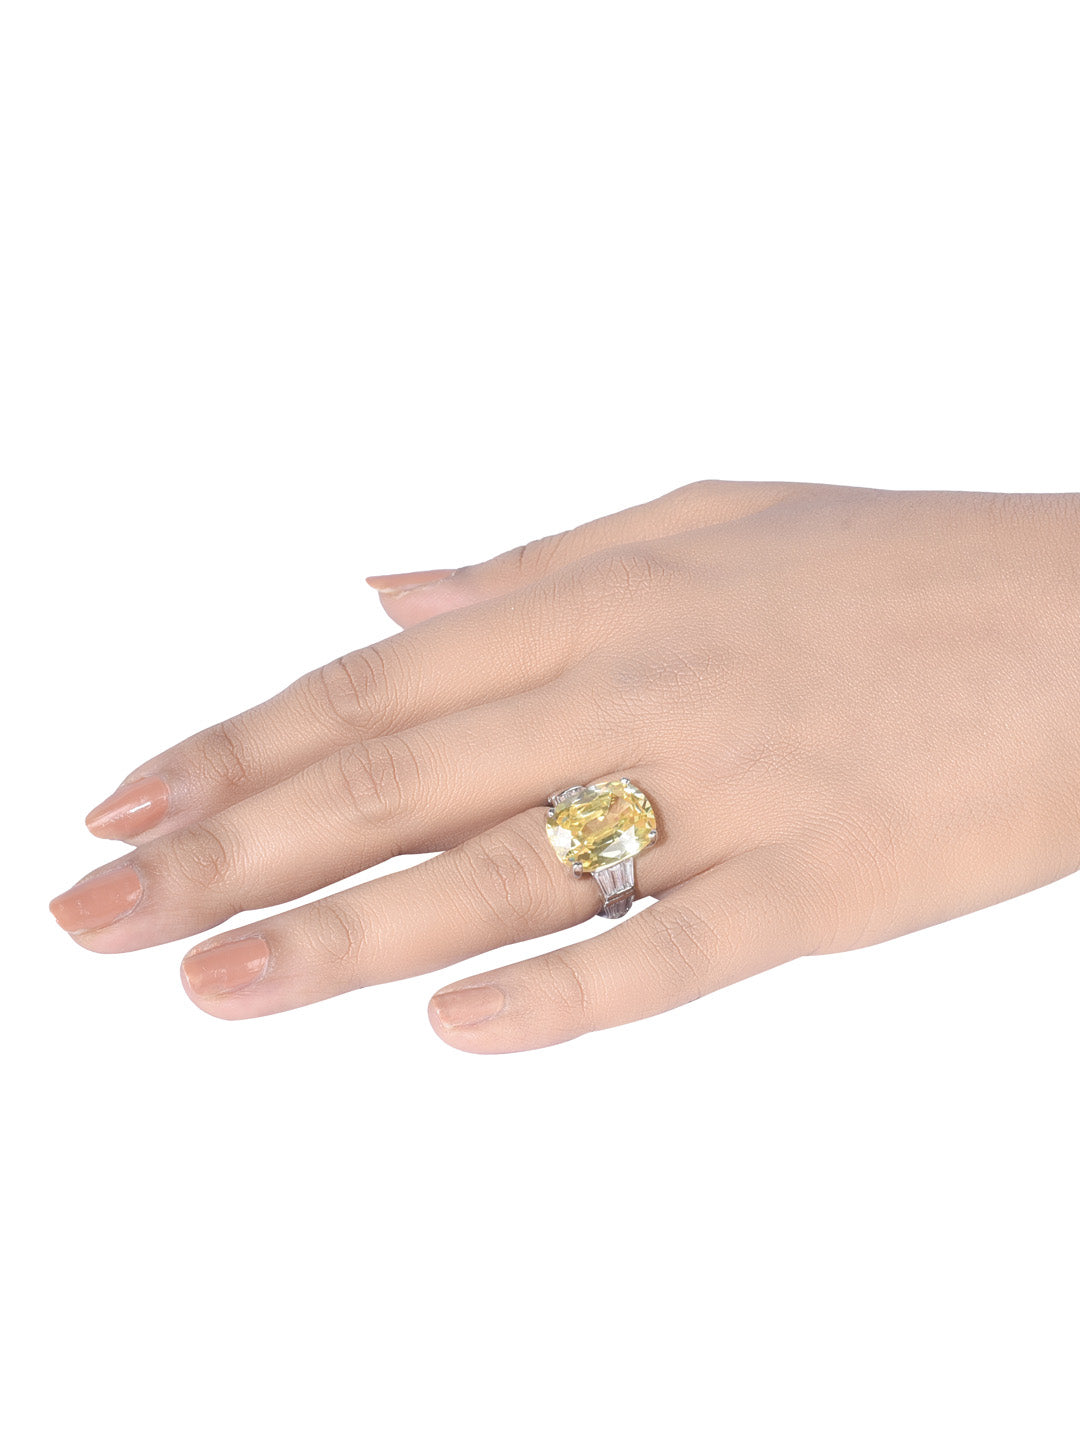 Yellow Oval With Baguettes Ring